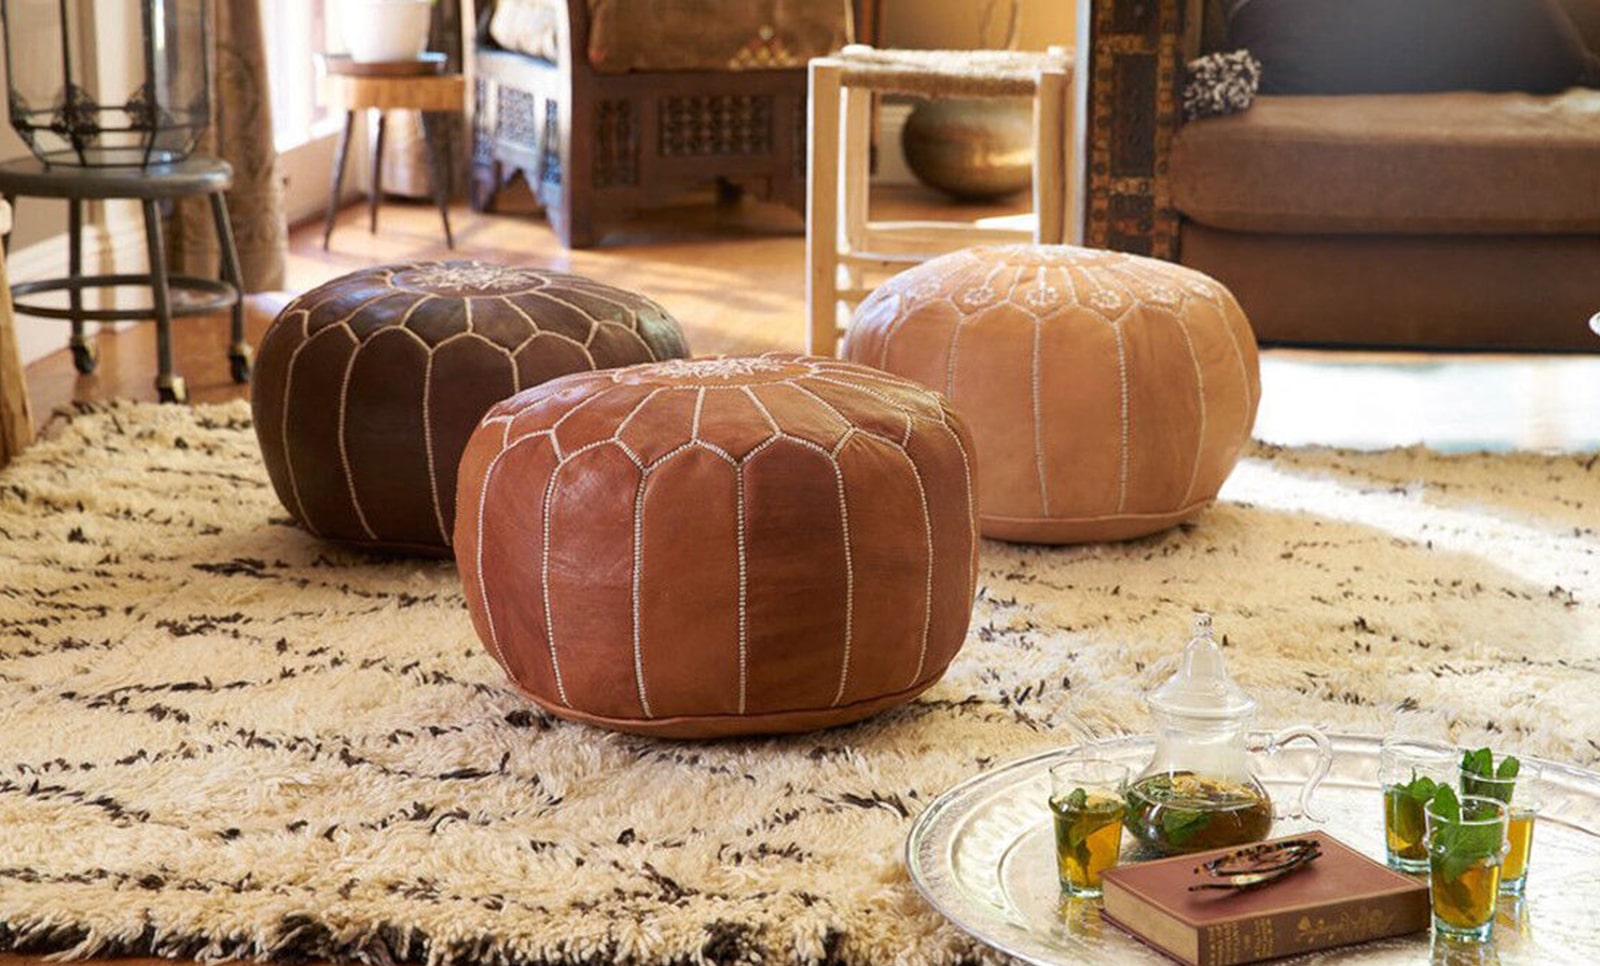 Picking a leather berber pouf: 4 recommendations